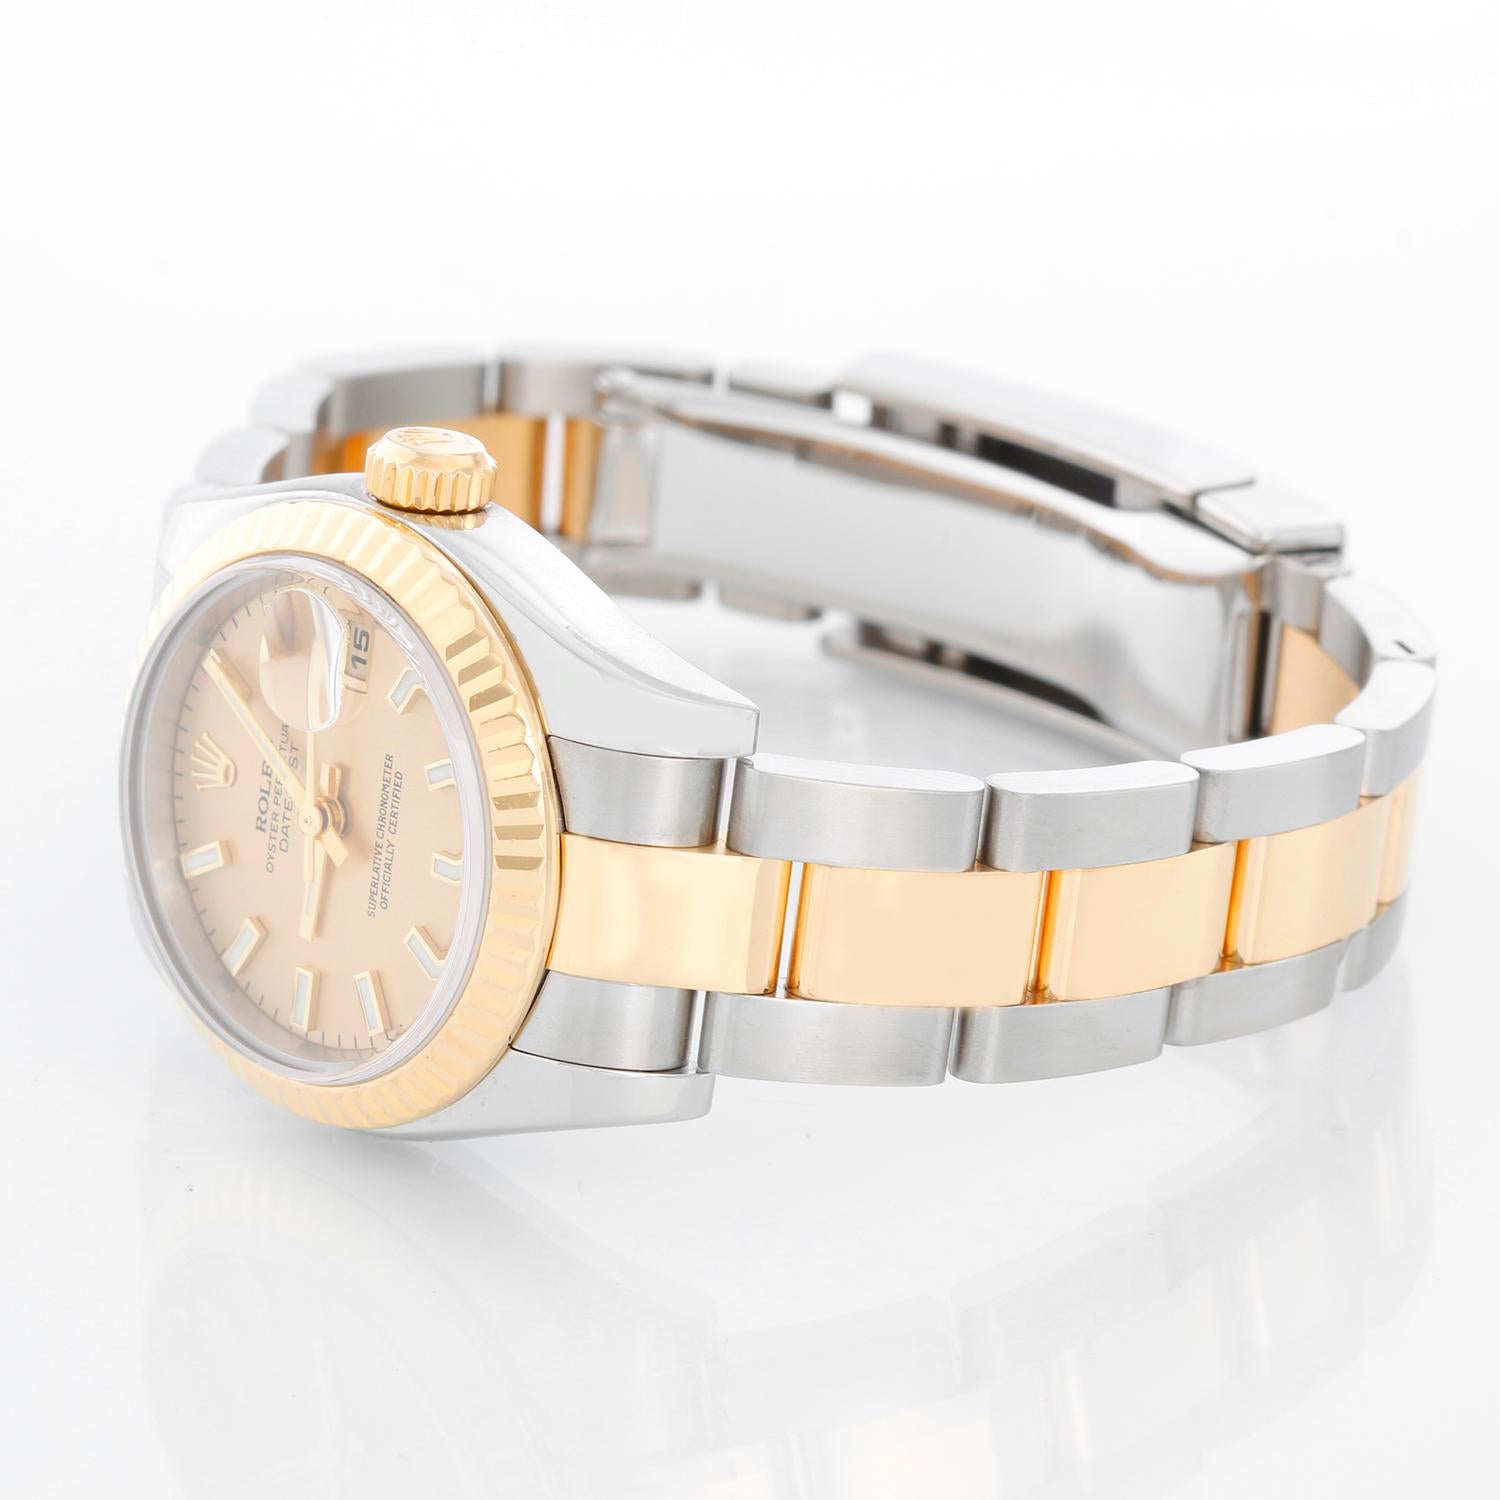 Rolex Ladies Datejust 2-Tone Watch 179173 - Automatic winding, Quickset, 31 jewels, sapphire crystal. Stainless steel case with 18k yellow gold fluted bezel ( 26 mm). Champagne dial with stick hour markers. Stainless steel and 18k yellow gold hidden